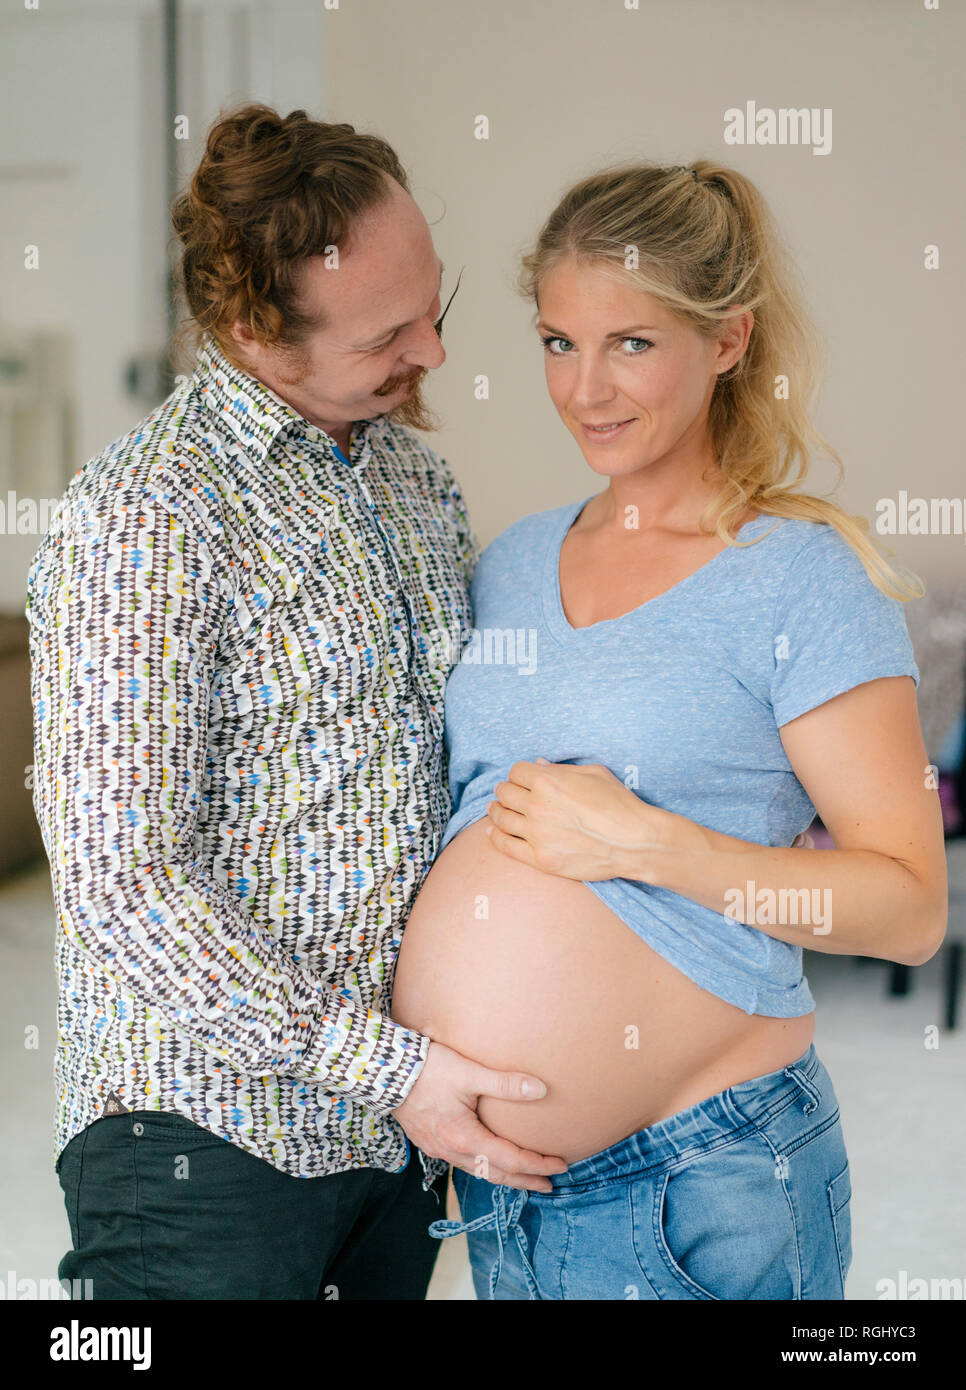 Man touching belly of smiling pregnant woman Stock Photo